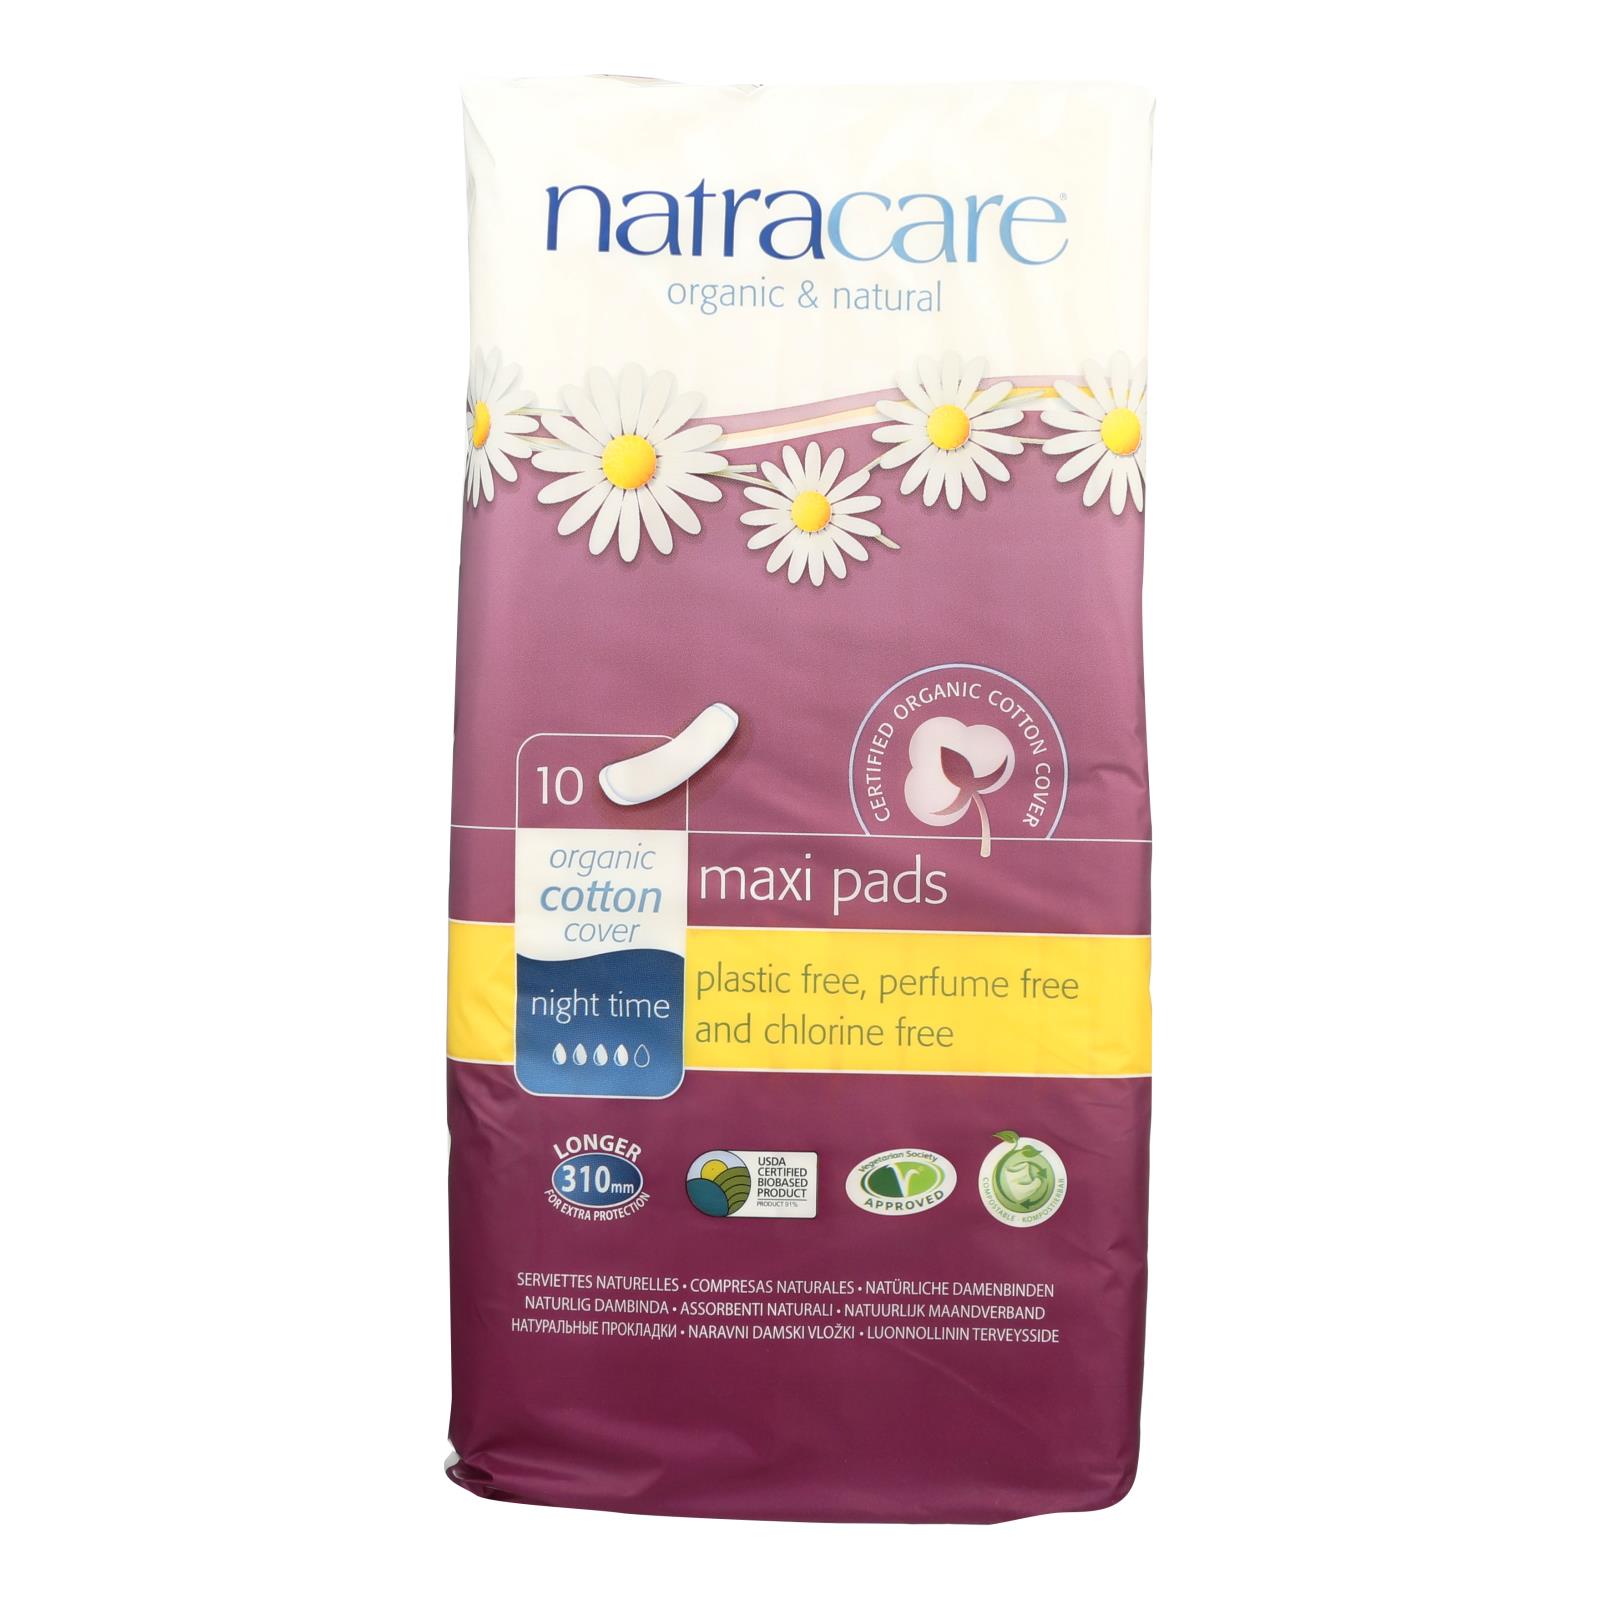 Natracare Natural Pads - 12개 묶음상품 - 10 CT